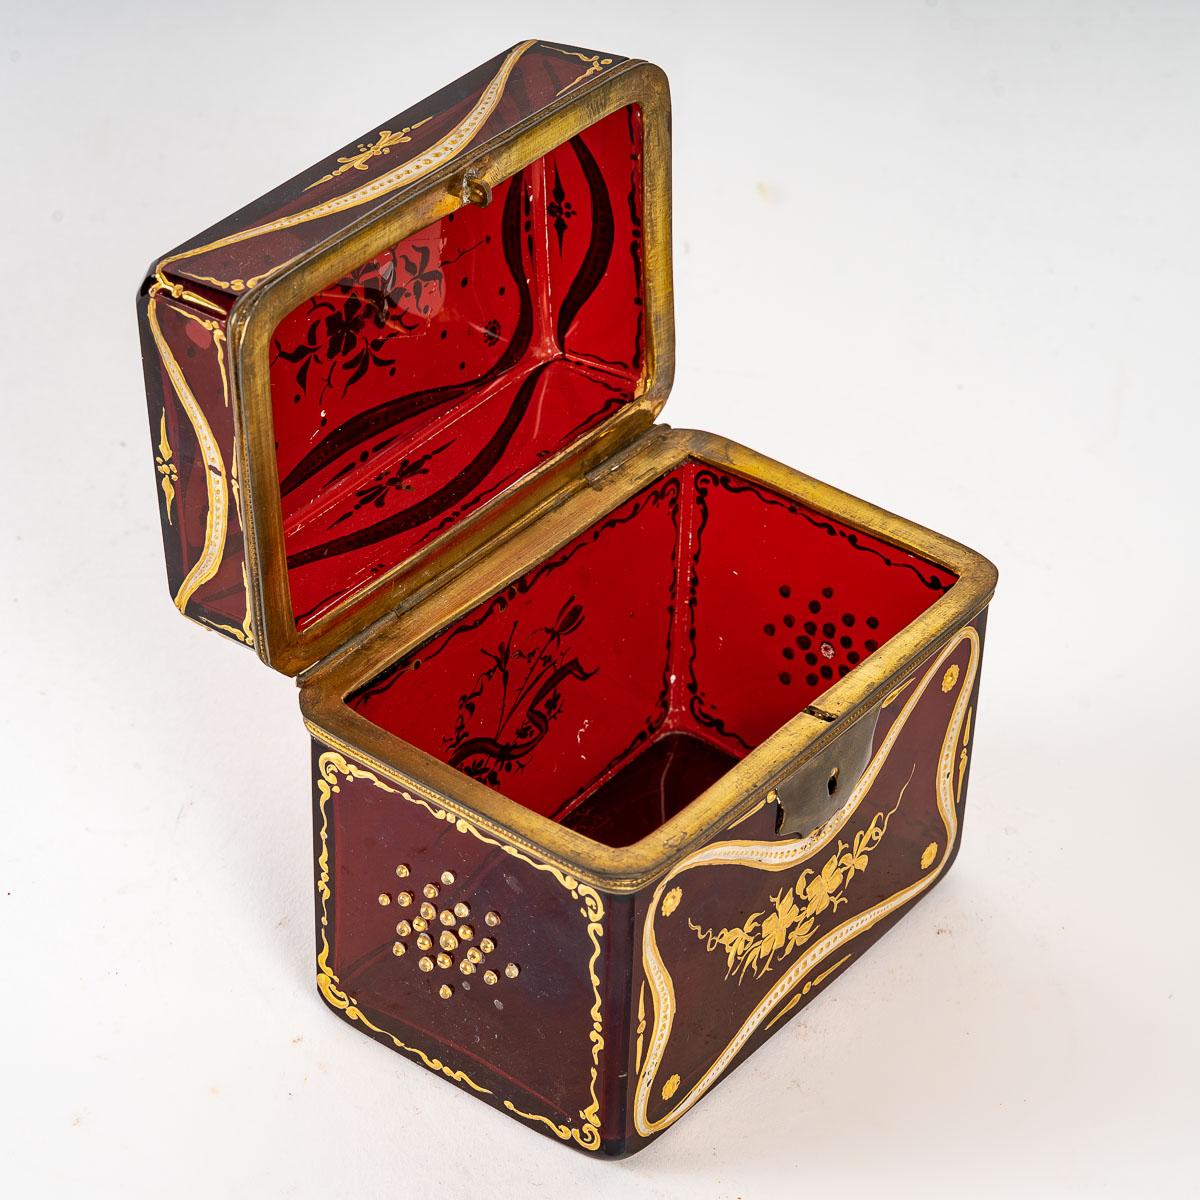 Bohemian crystal box, 19th century
Bohemian crystal box, white and gold enameled, circa 1880, Napoleon III period, mounted with gilt brass.
Measures: h: 10.5 cm, w: 11.5 cm, d: 7.5 cm.
 